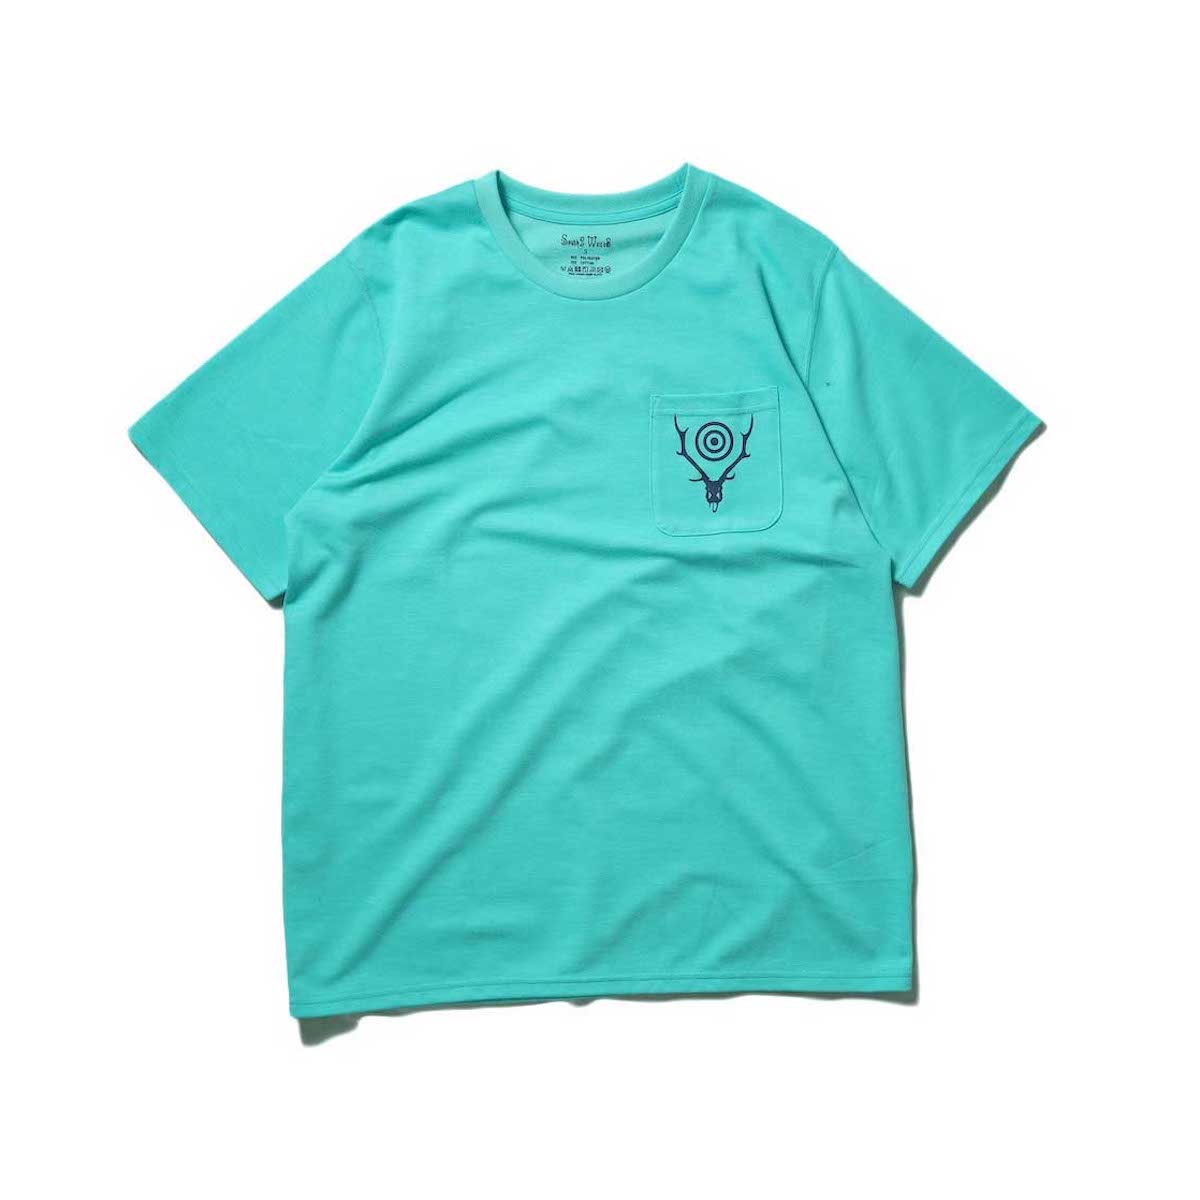 South2 West8 / S/S ROUND POCKET TEE - CIRCLE HORN (Turquoise)